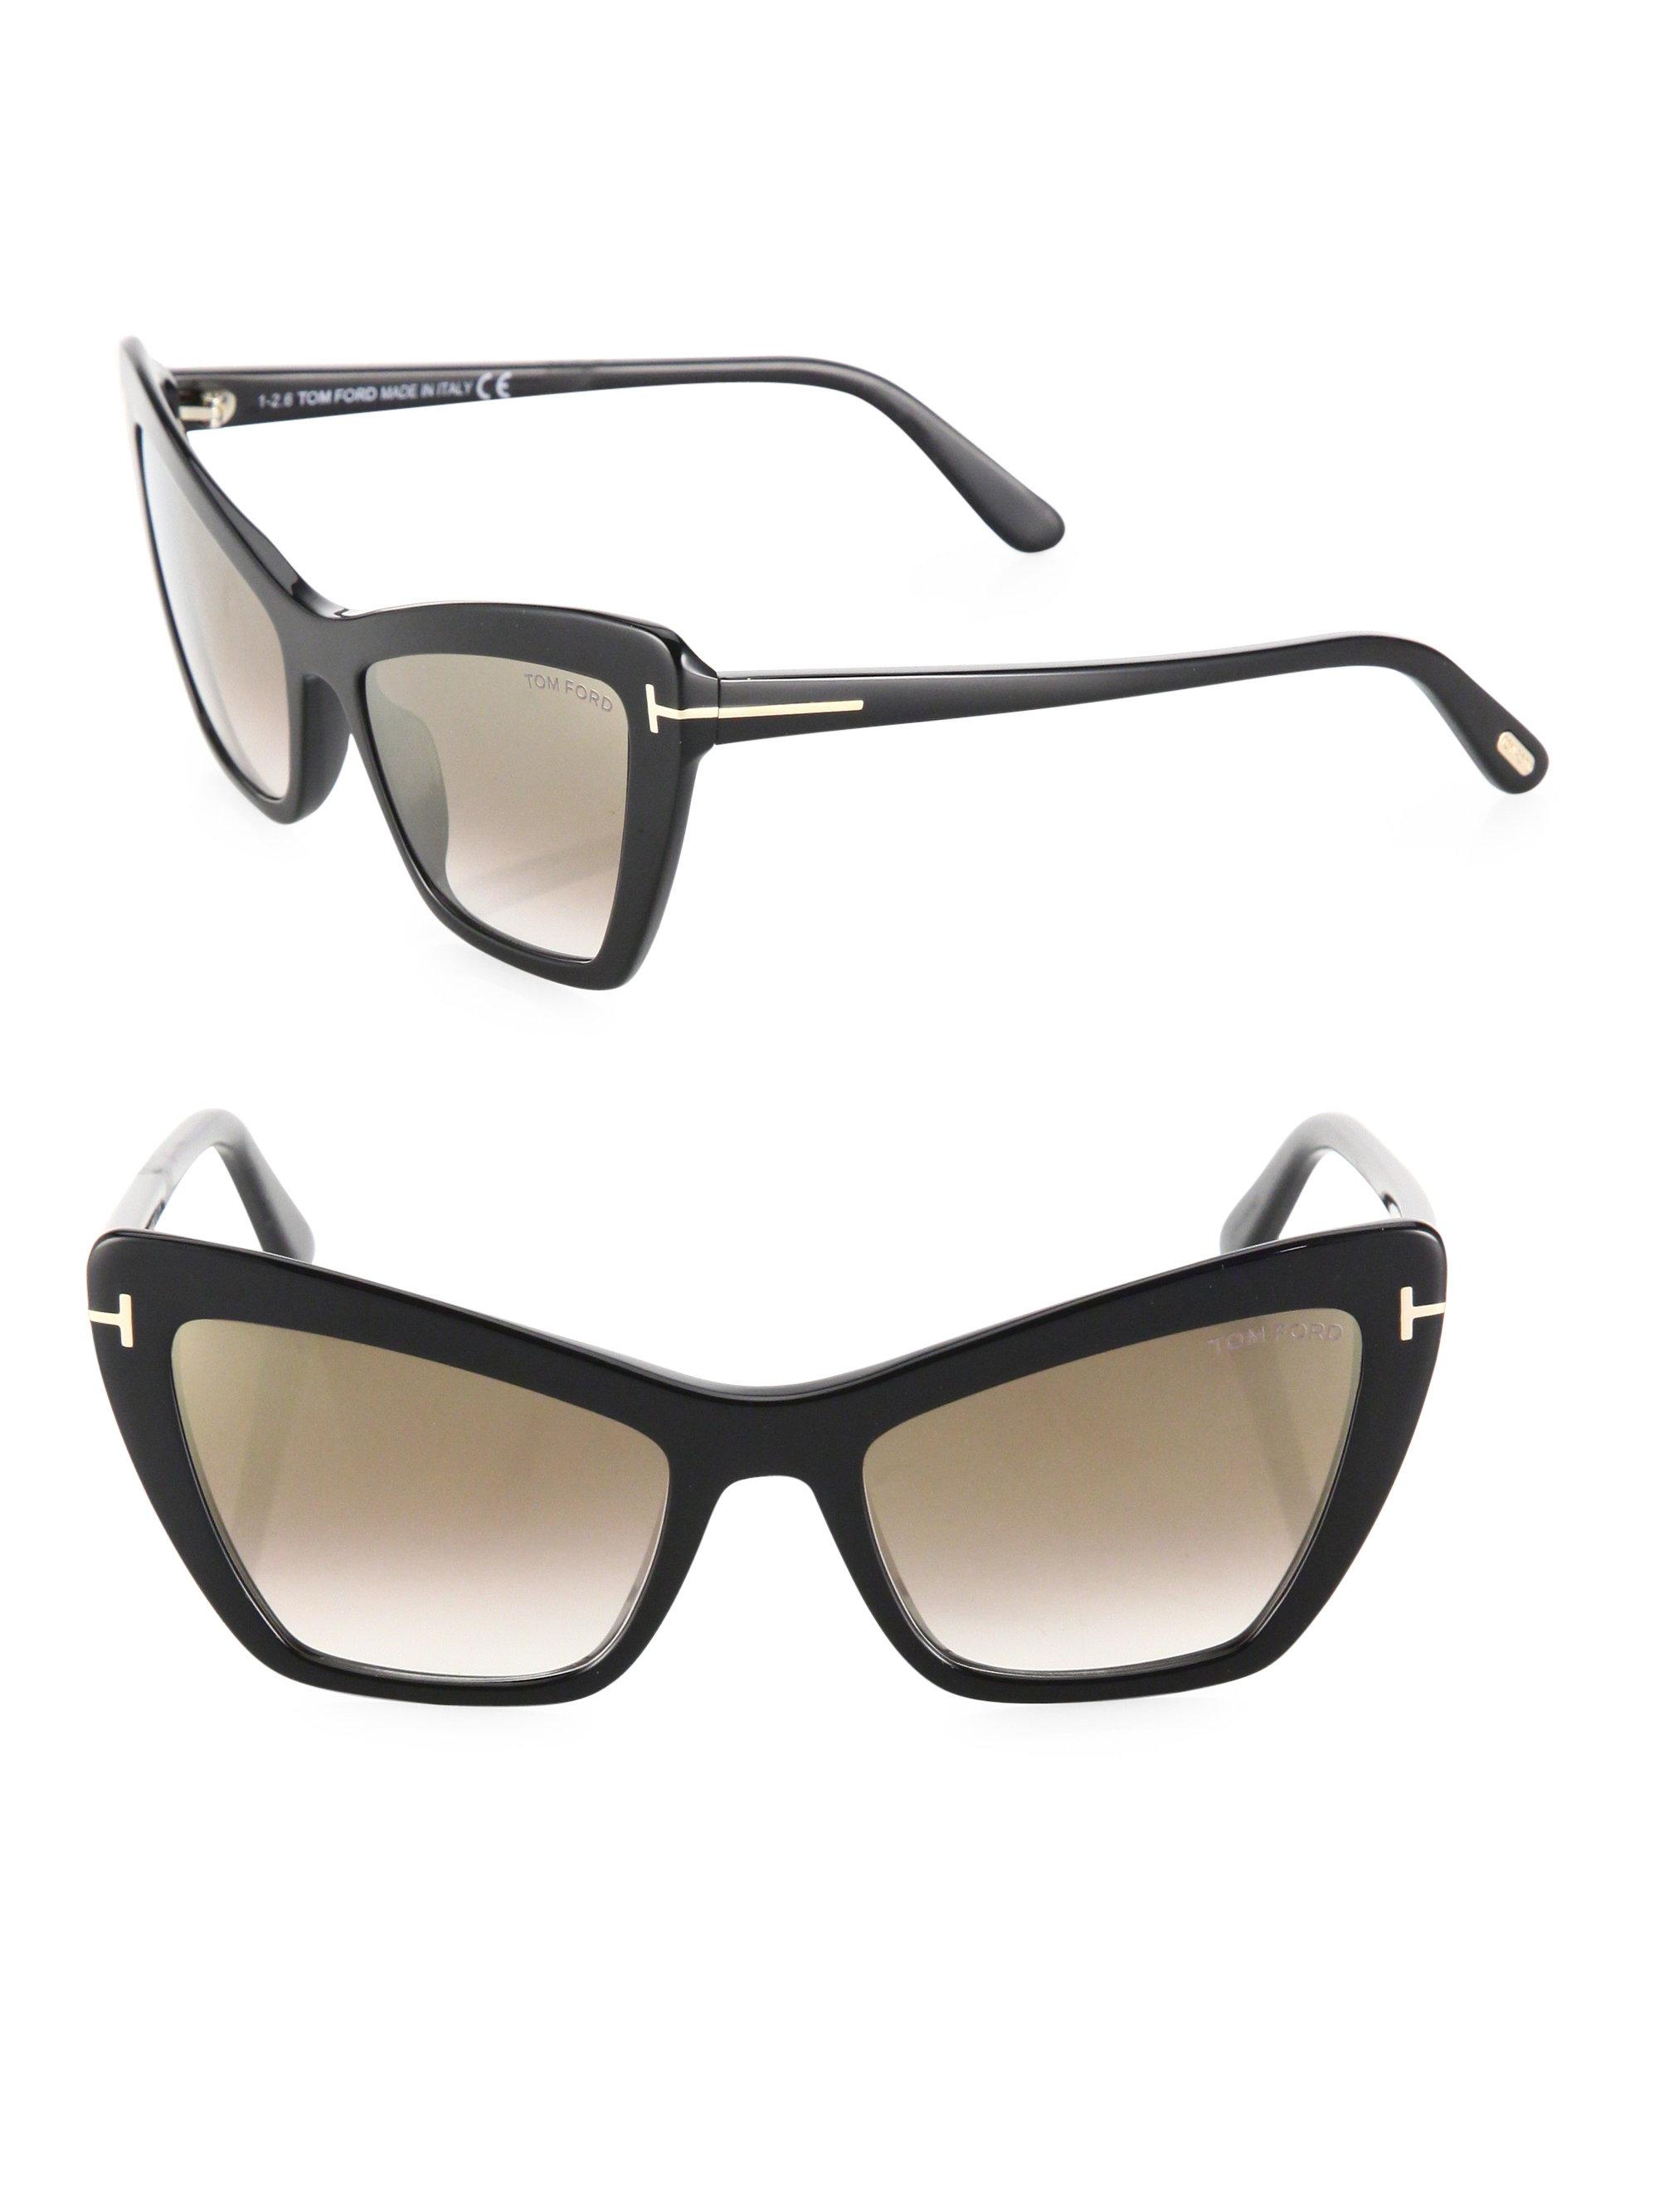 Lyst - Tom Ford Valesca 55mm Mirrored Cat Eye Sunglasses in Black